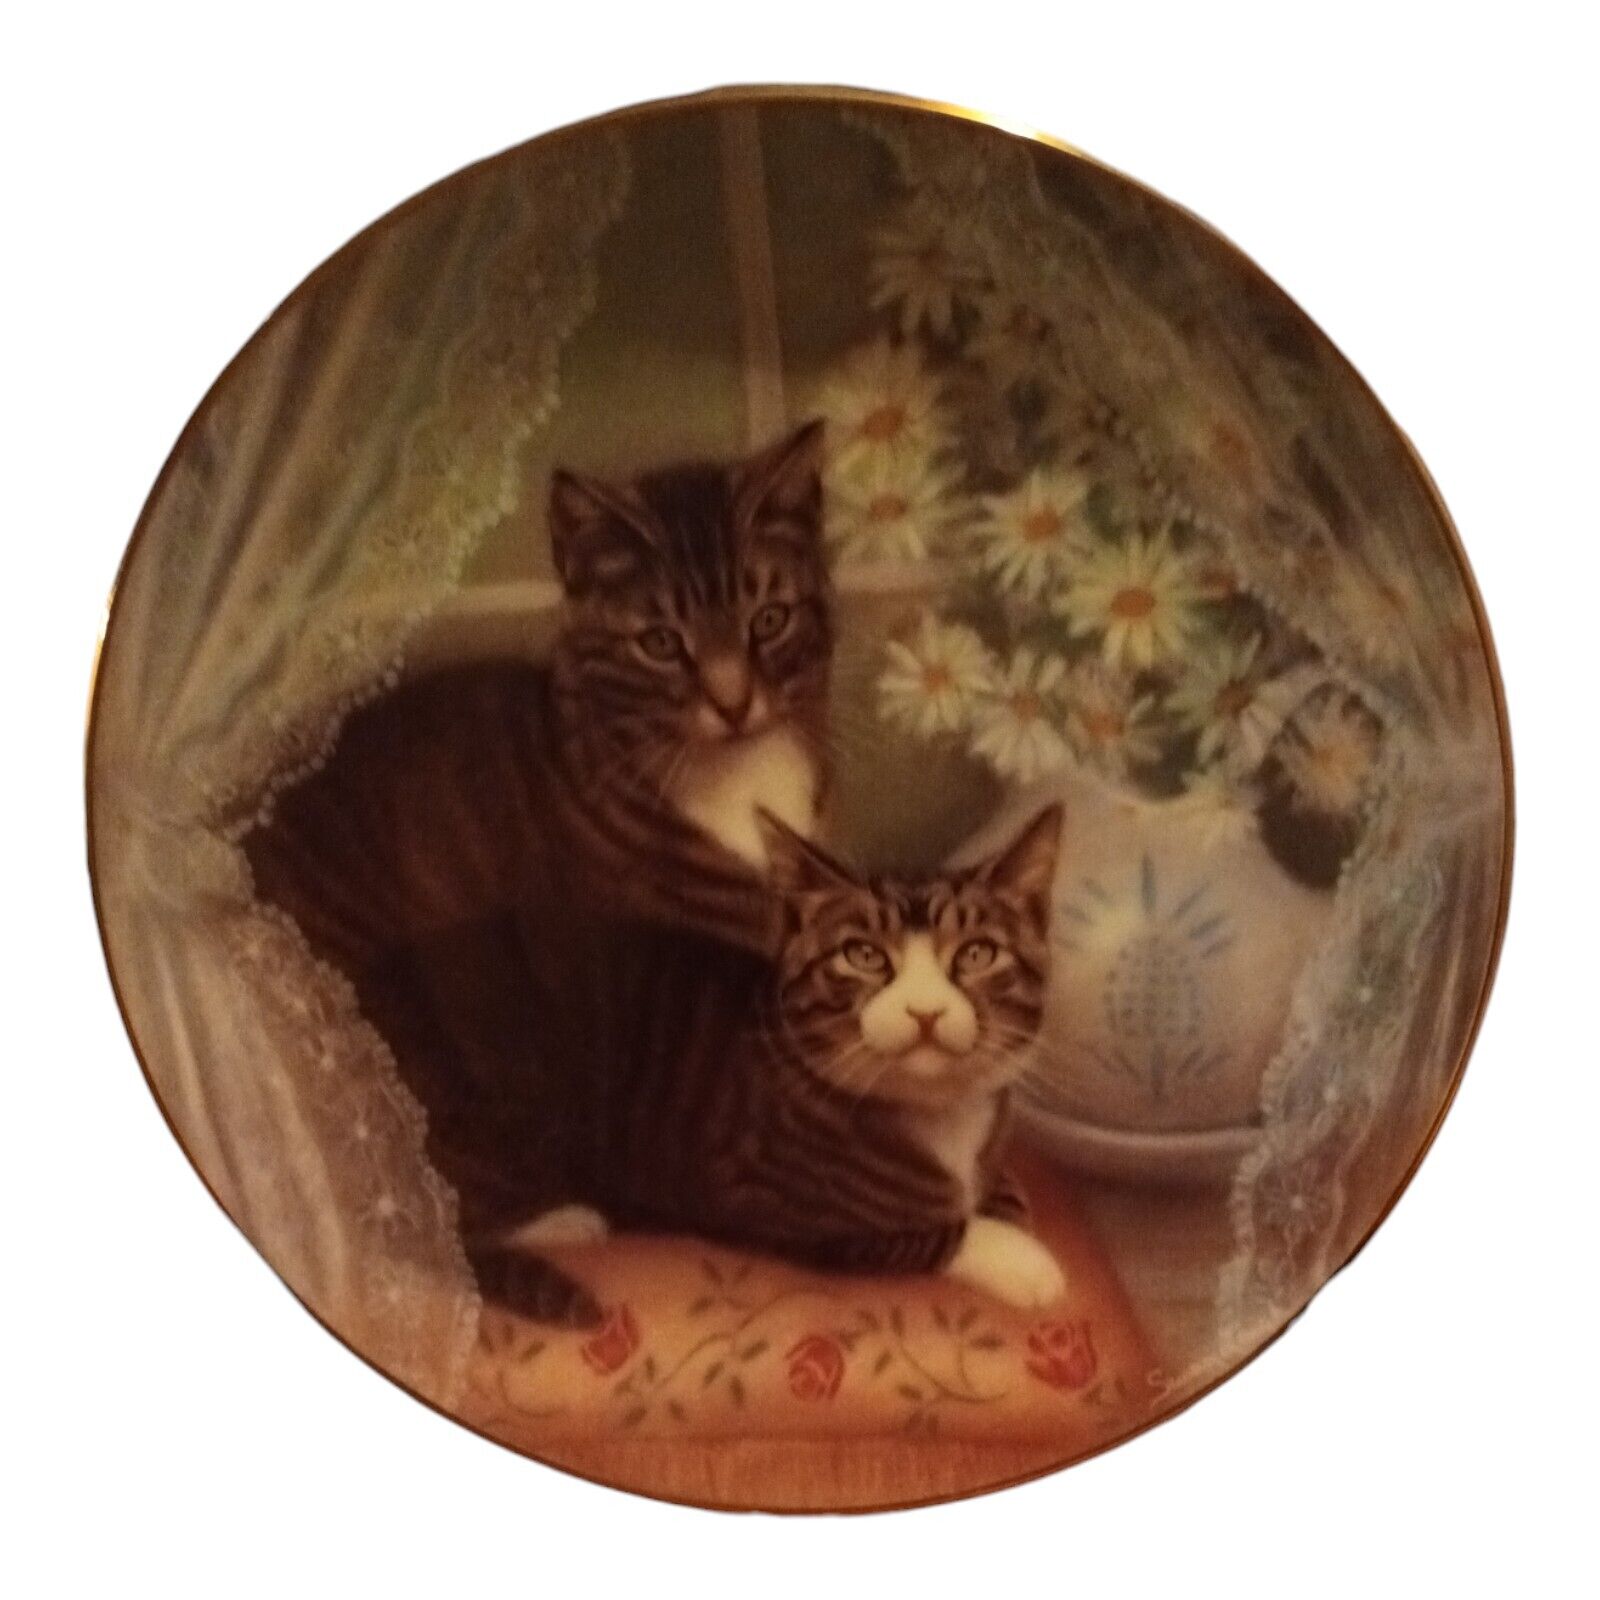 AMERICAN ARTIST 1987 ROMEO AND JULIET CAT COLLECTERS PLATE 8 IN. MADE IN USA